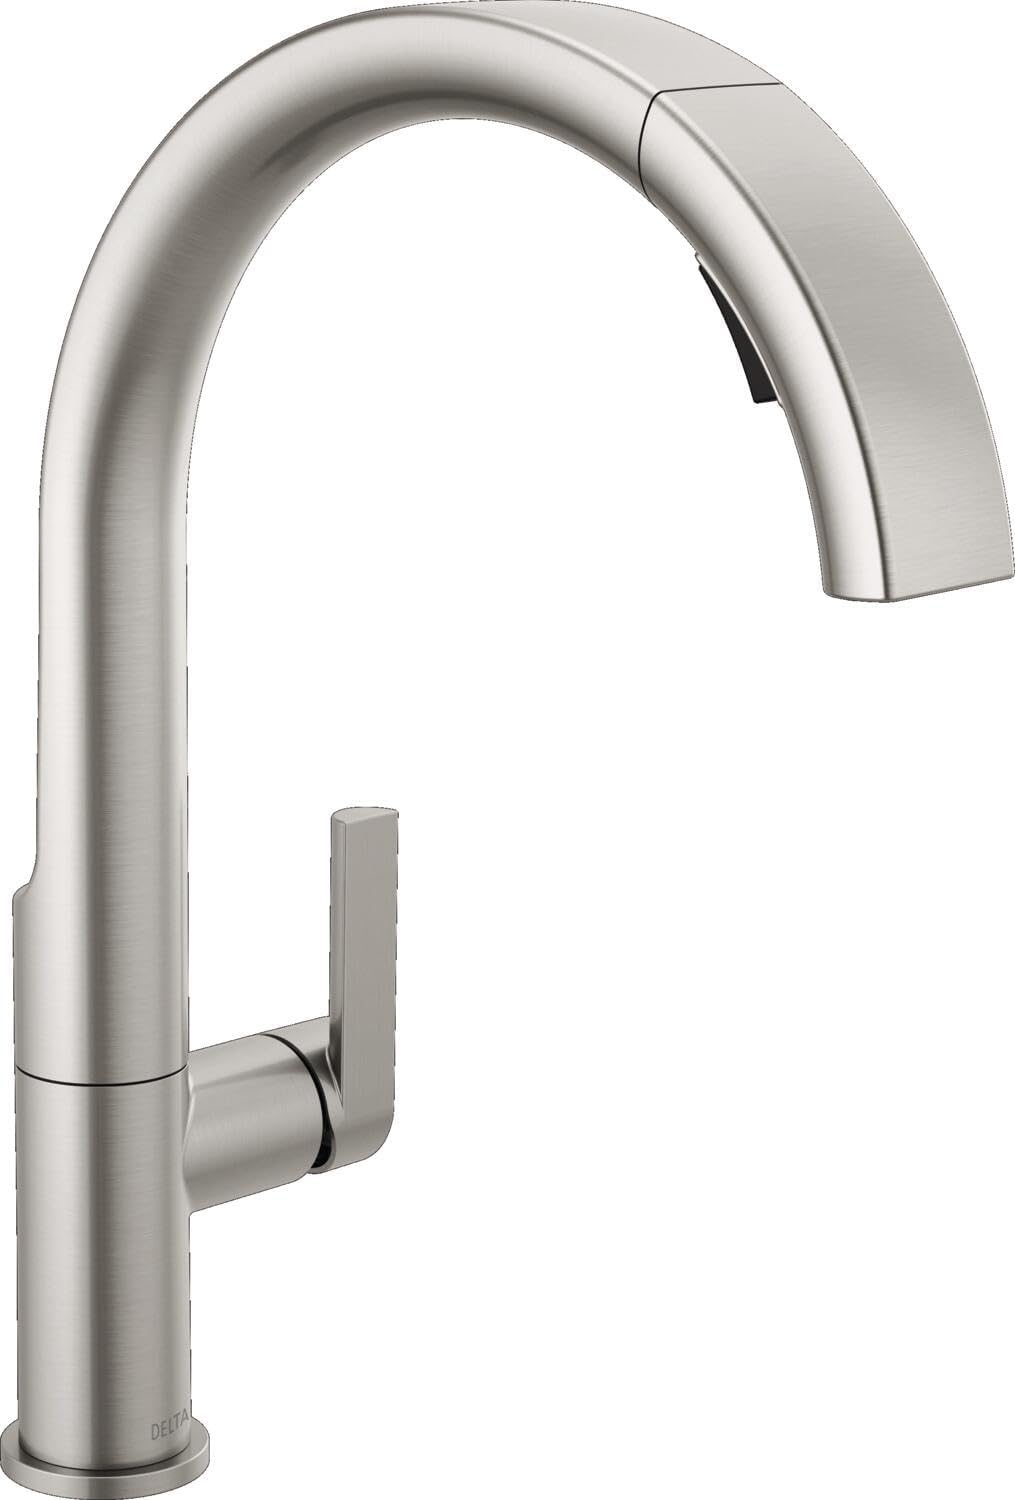 I splurged and bought this faucet because I liked the high-arc shaped and wanted a faucet with a pull down sprayer. This works well. It has two settings: aerated stream or spray. You press a button to switch between the two settings. I have it set on aerated stream and rarely use the spray.It is very easy to pull down the sprayer to spray certain areas of the sink. The pull down hose is a good length.Intuitive to use and not awkward to use.The water pressure is strong. You can adjust the amount 